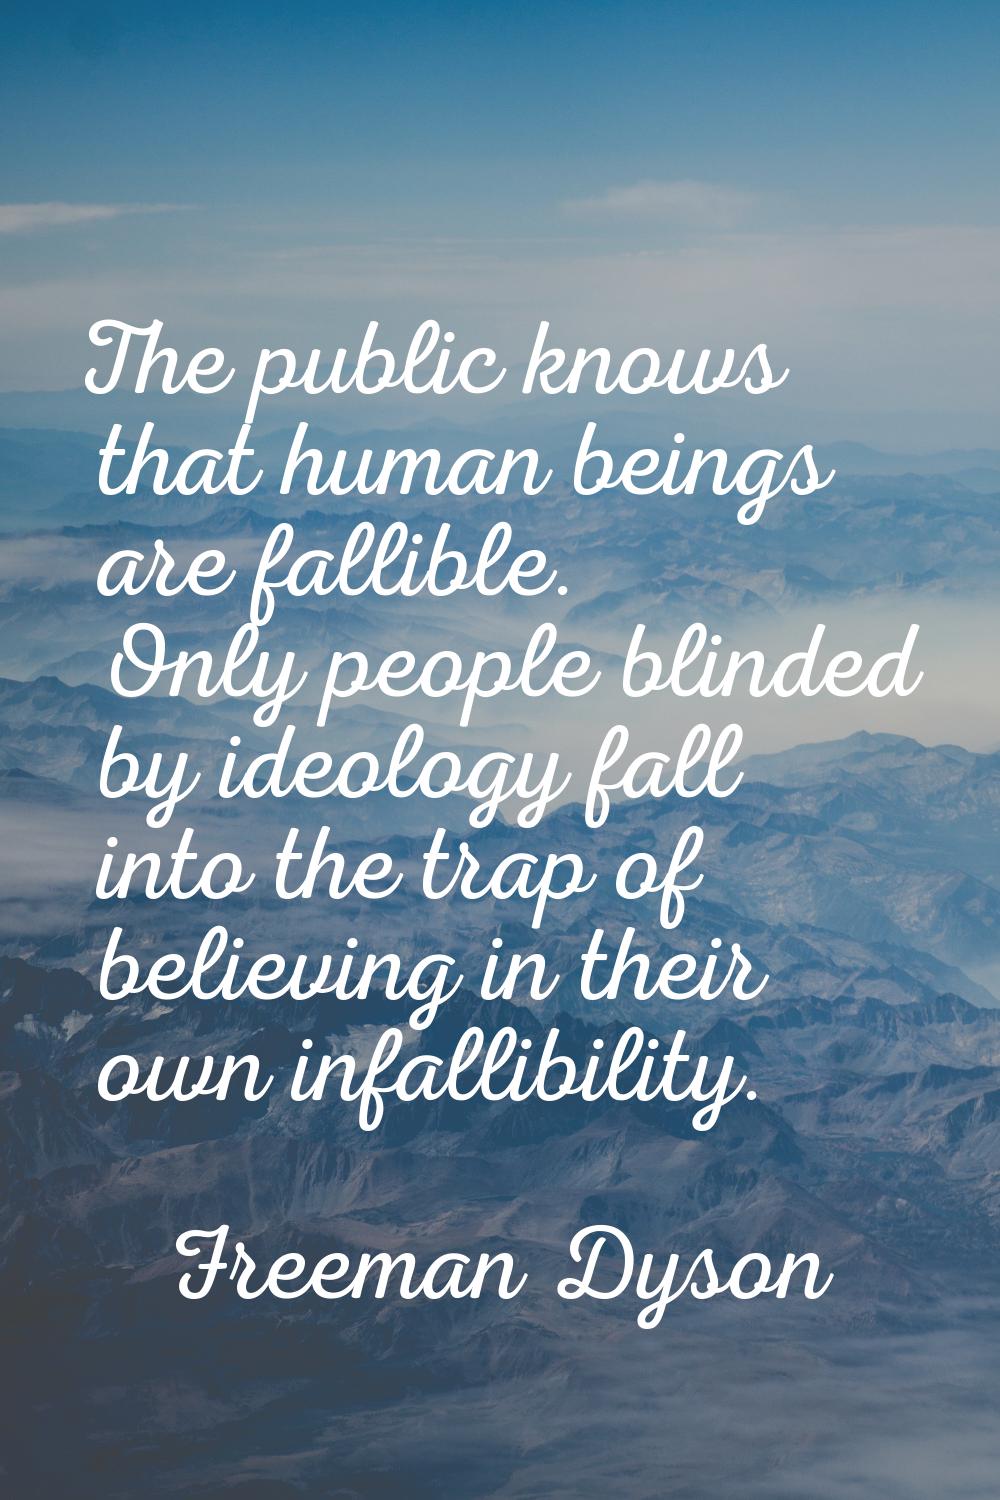 The public knows that human beings are fallible. Only people blinded by ideology fall into the trap